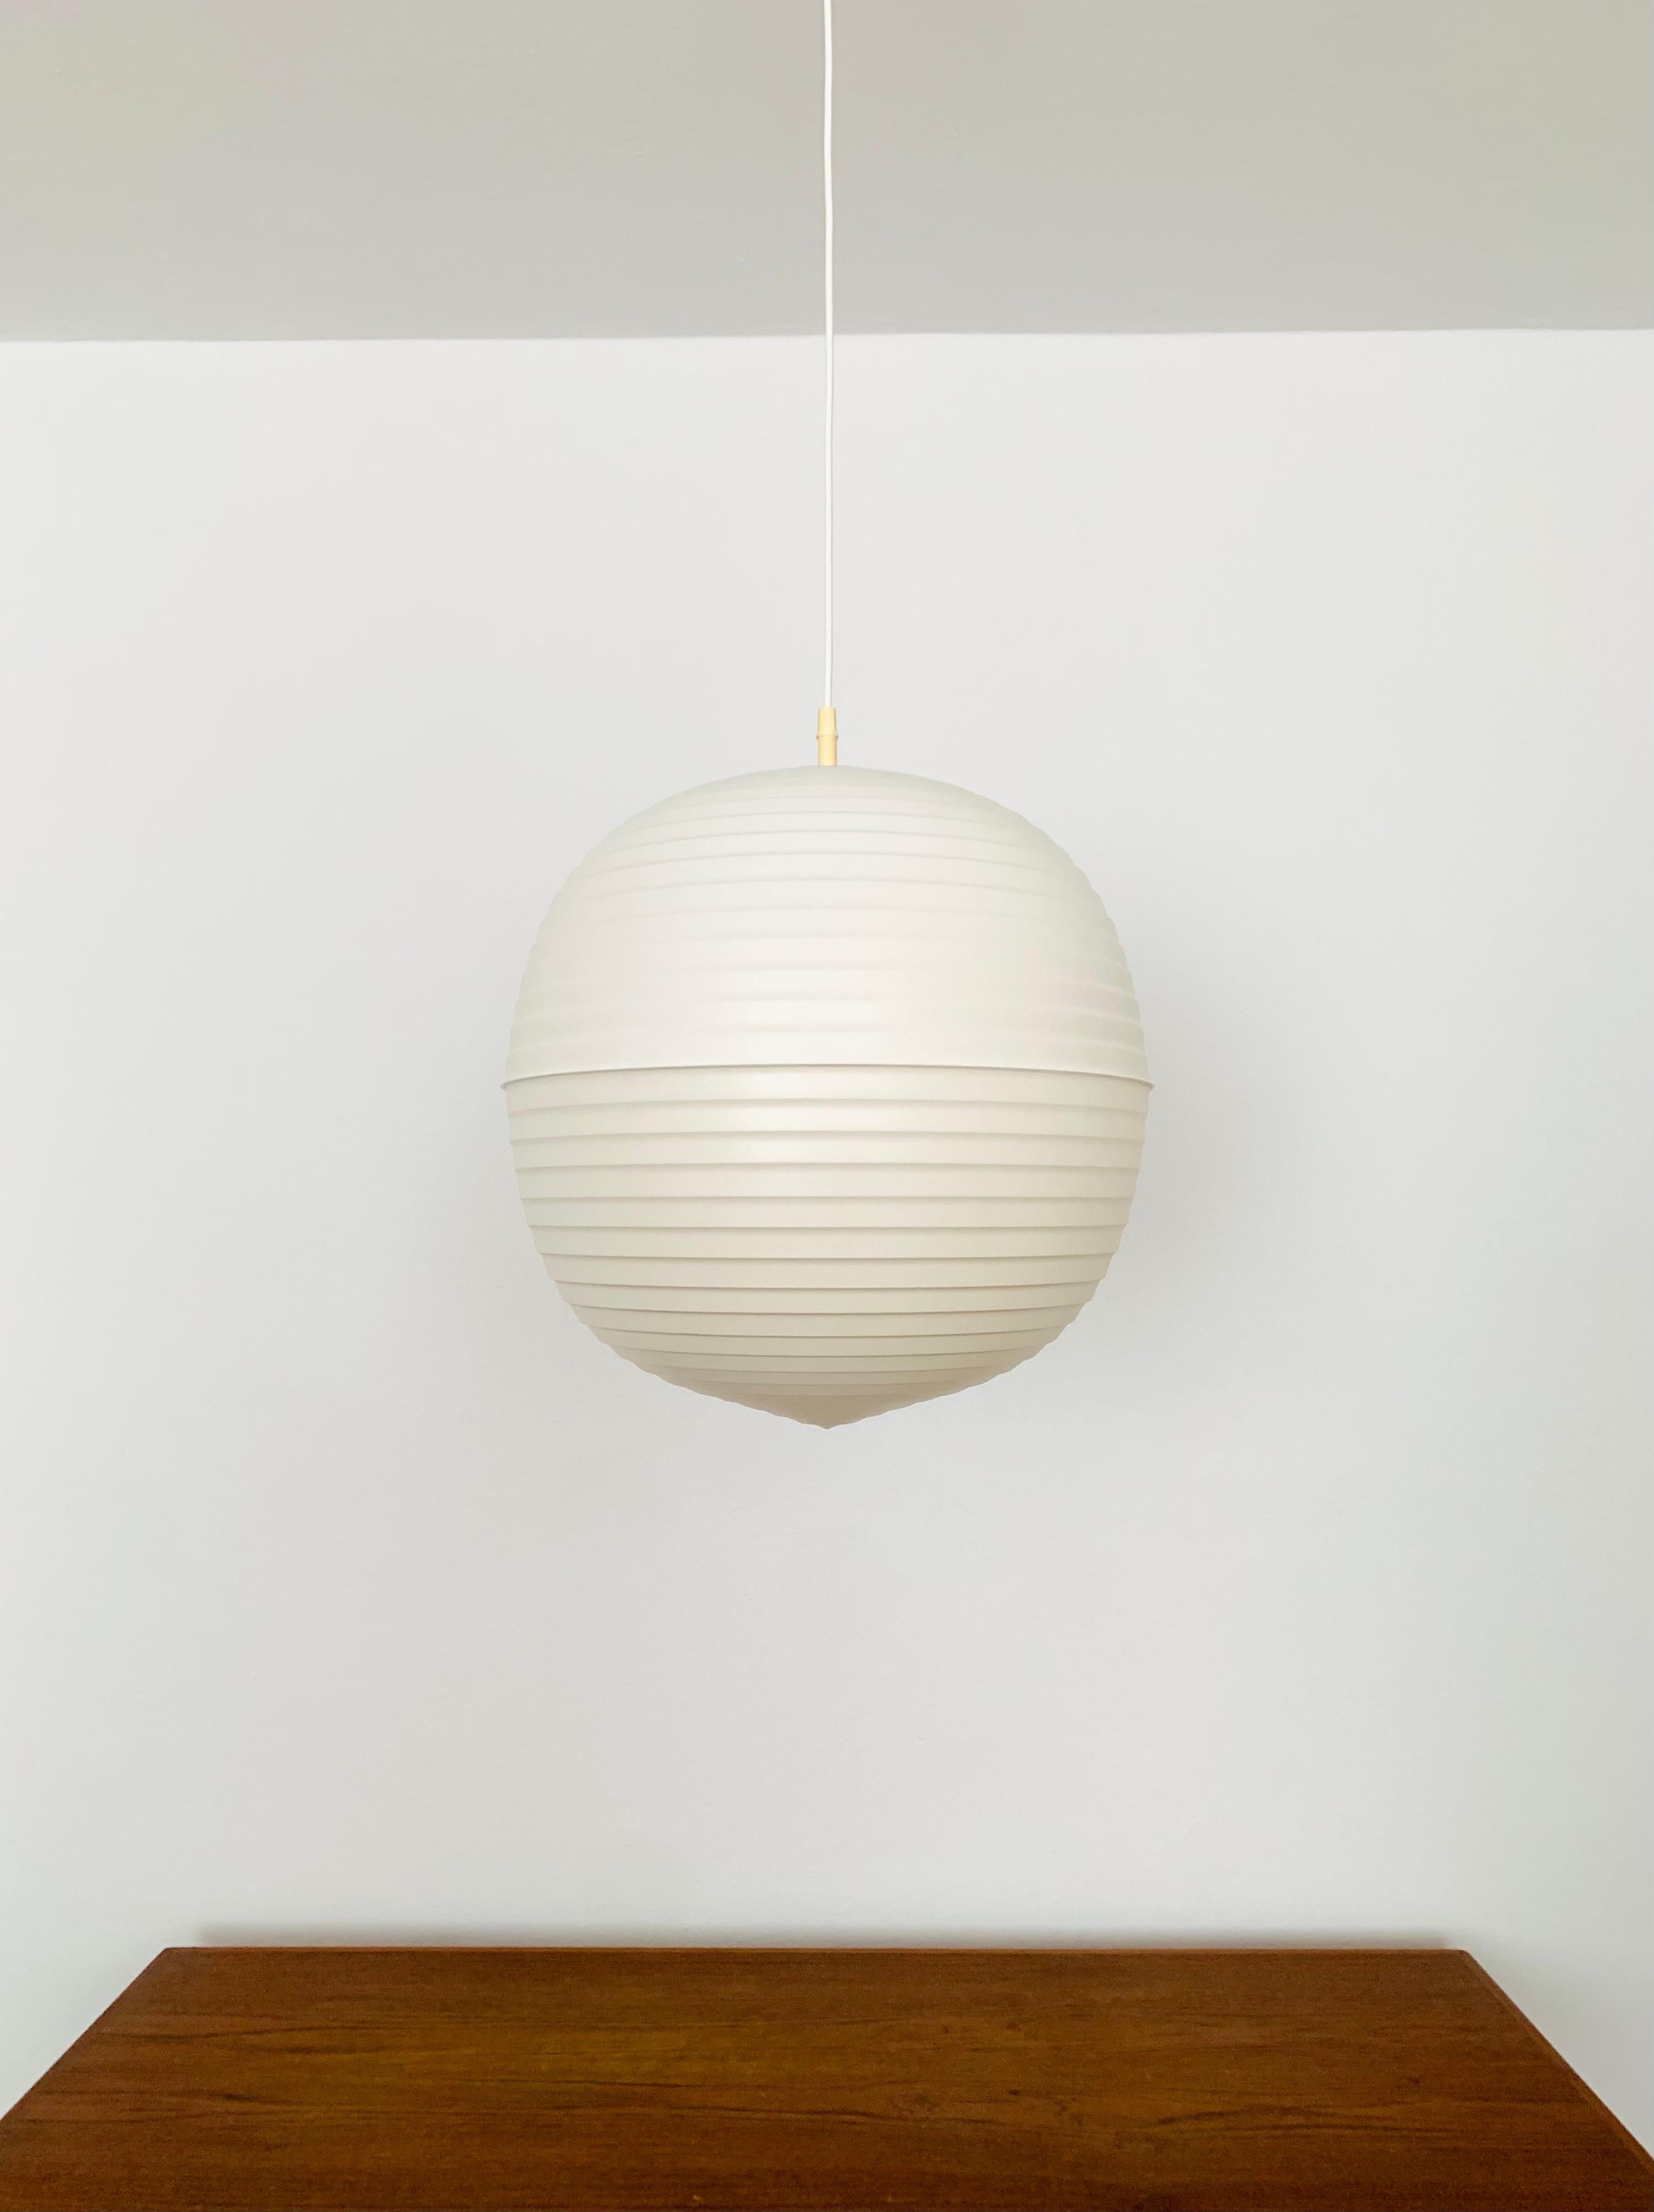 Origami Pendant Lamp by Aloys Gangkofner for Erco In Good Condition For Sale In München, DE